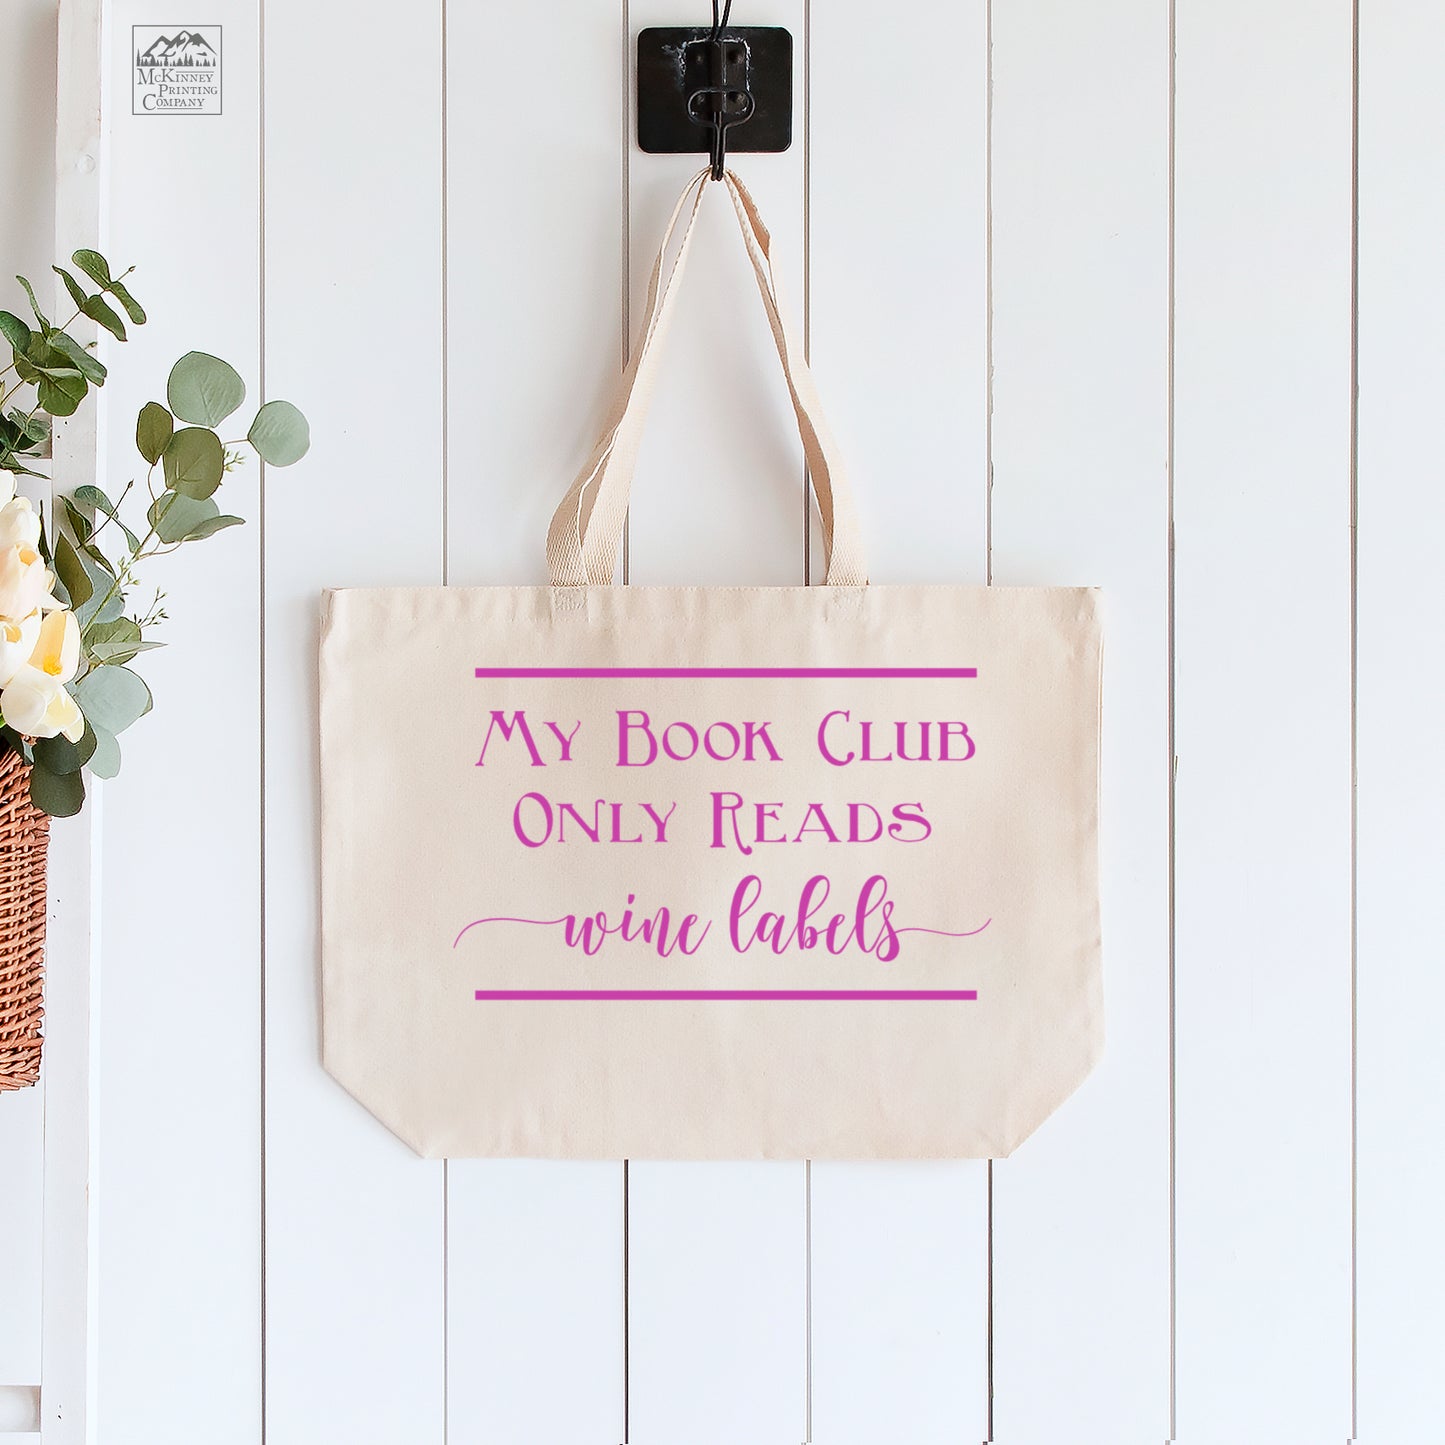 My Book Club Only Reads Wine Labels - Wine Lover Gift, Tote Bag with Zipper, Large, Fabric Shoulder Bag